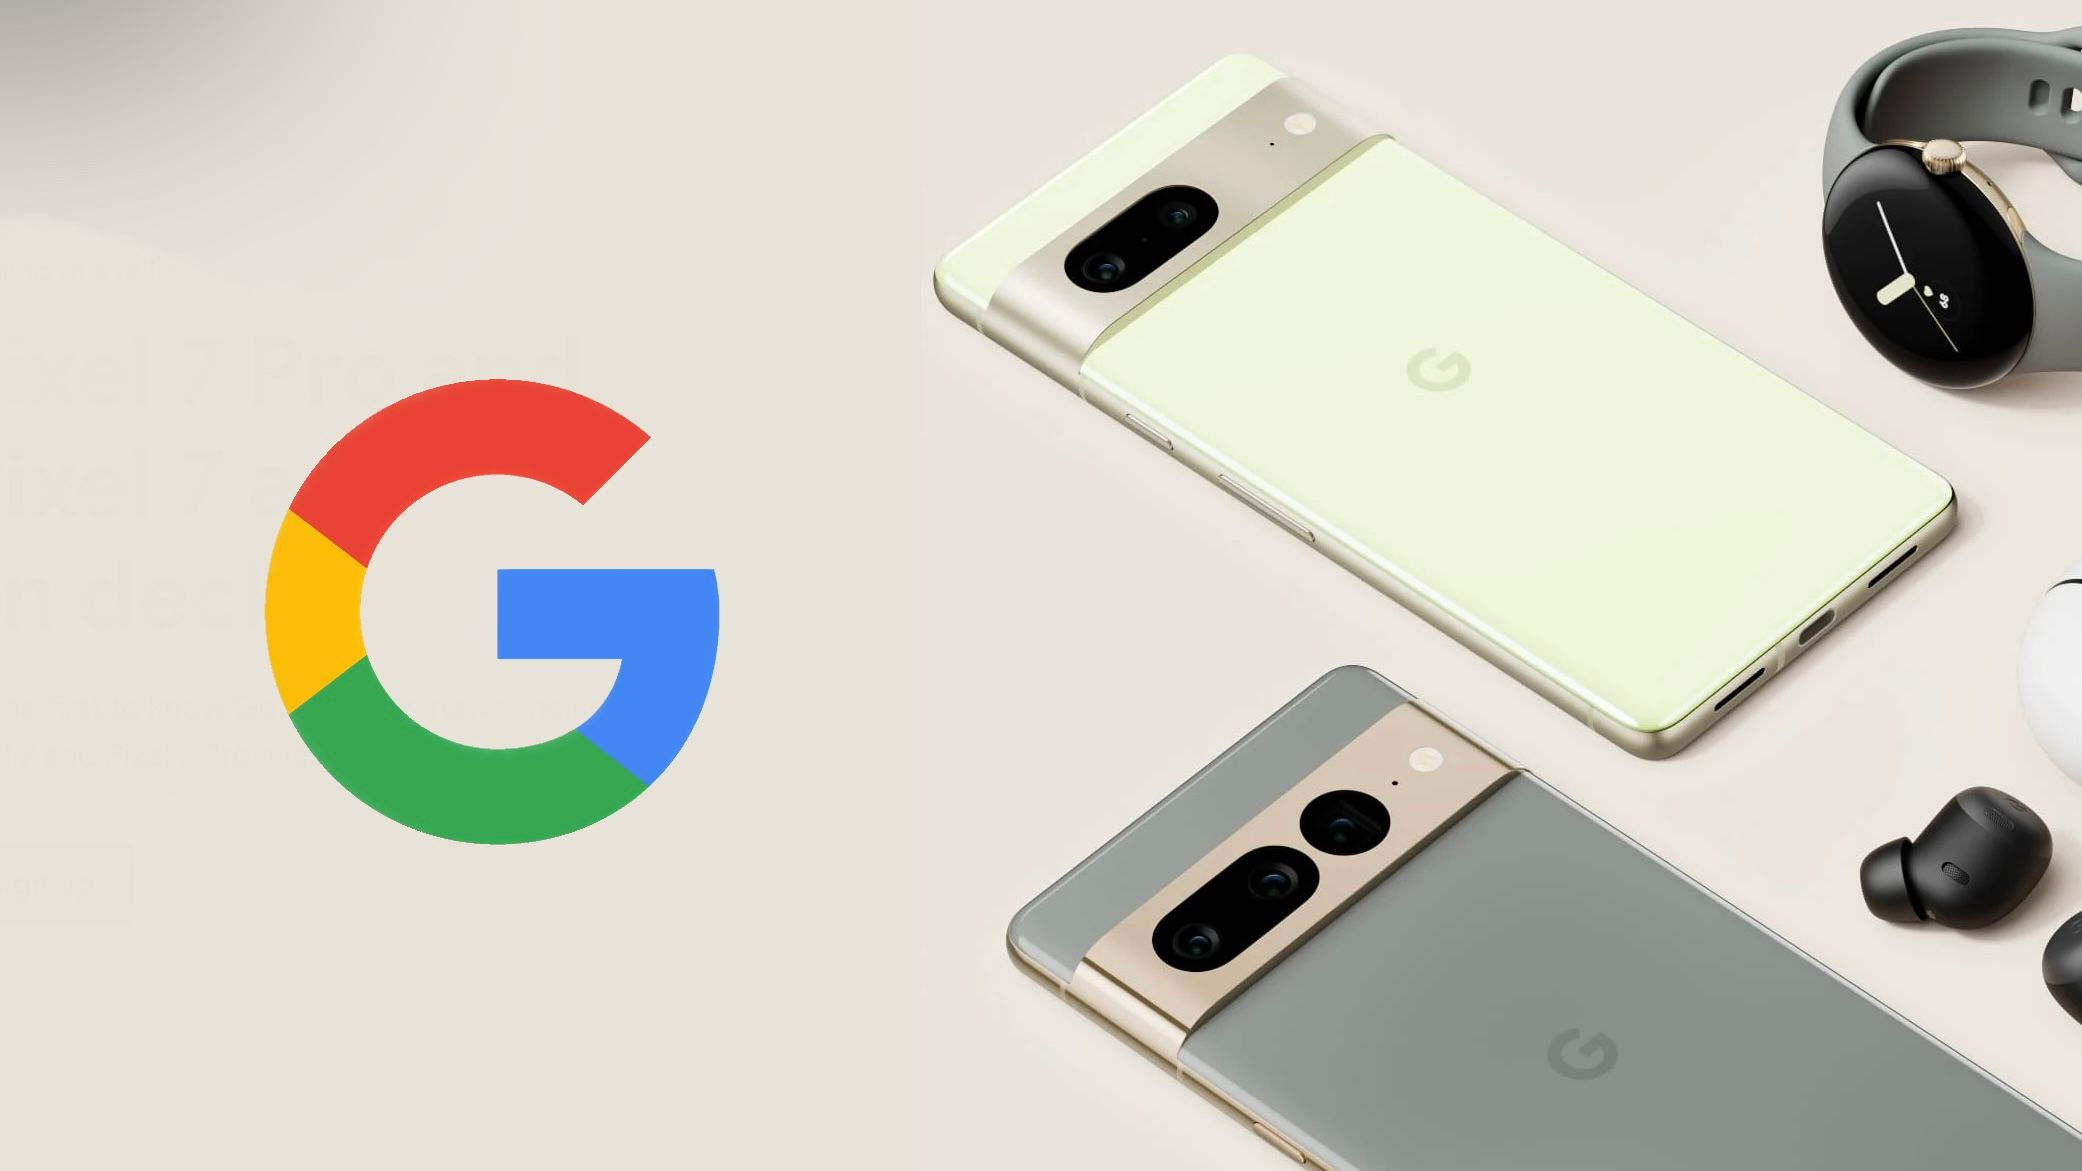 Google Pixel 7 Pro and Google Pixel 7: Early Hands-on